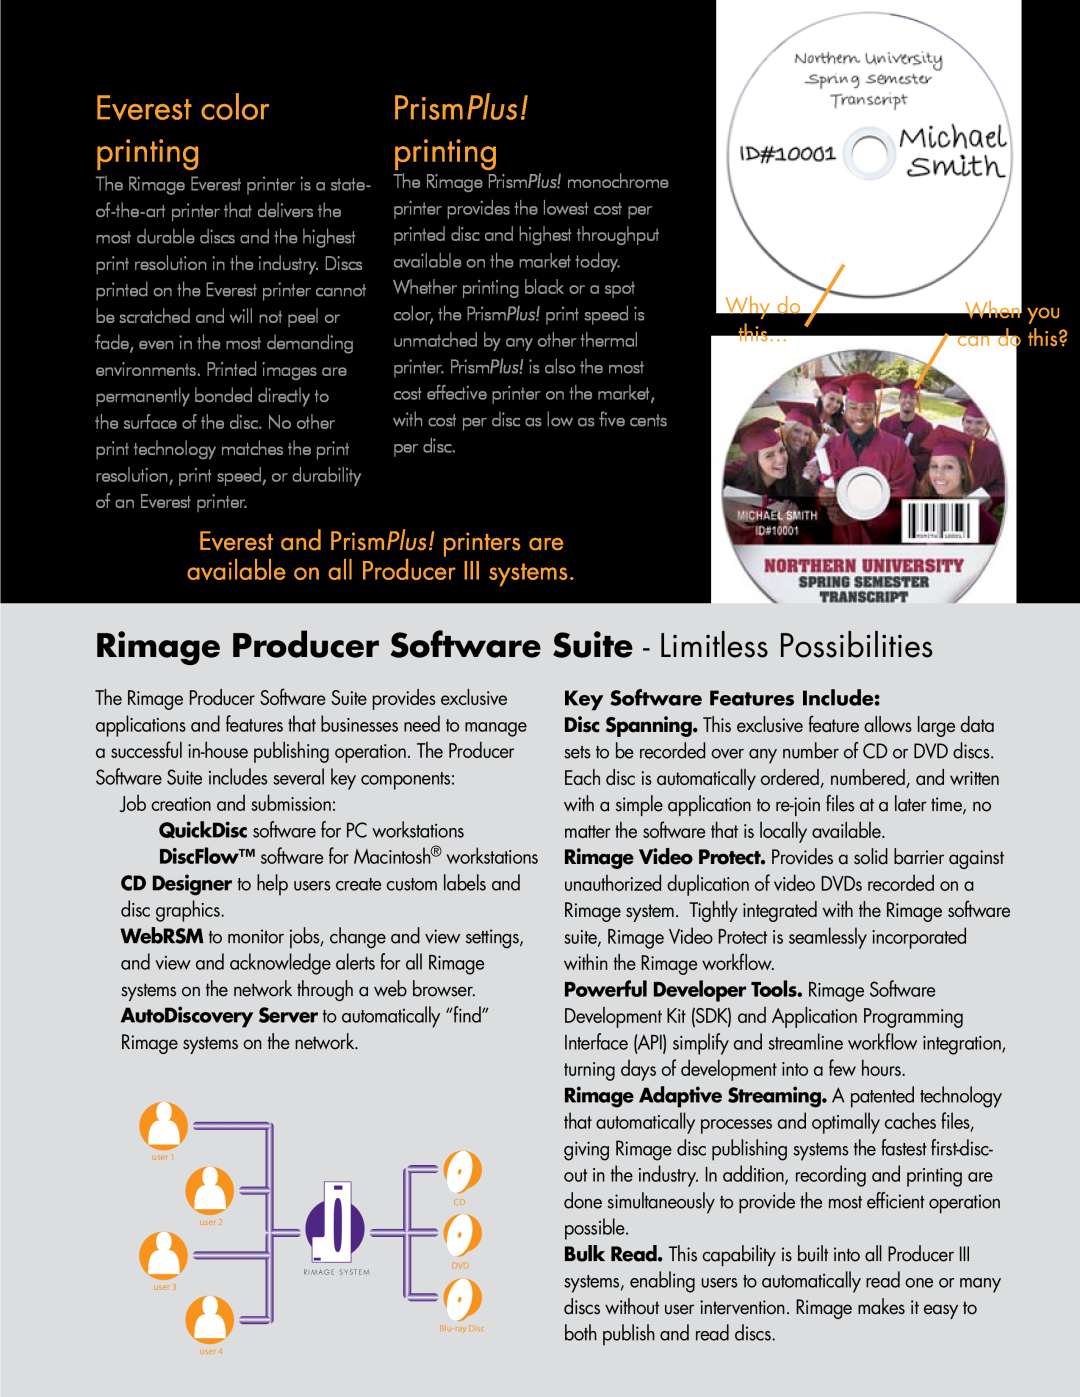 Rimage 7100N Rimage Producer Software Suite - Limitless Possibilities, Everest color printing, PrismPlus! printing, Why do 